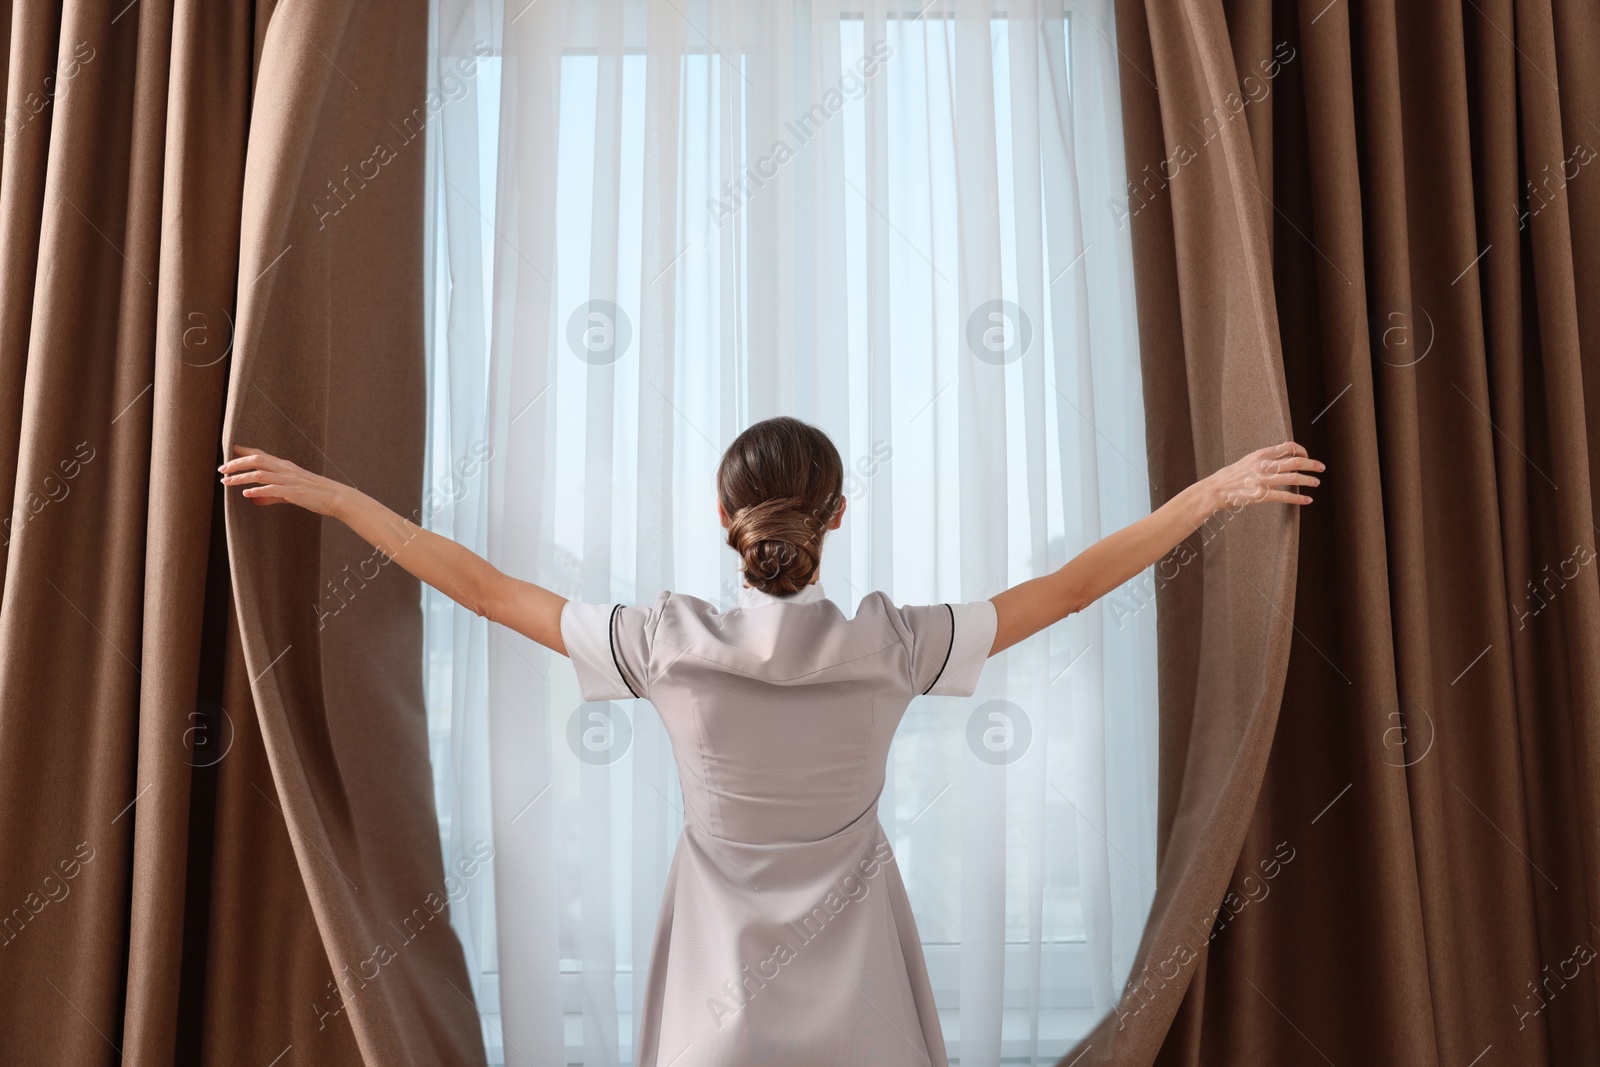 Photo of Chambermaid opening window curtains in hotel room, back view